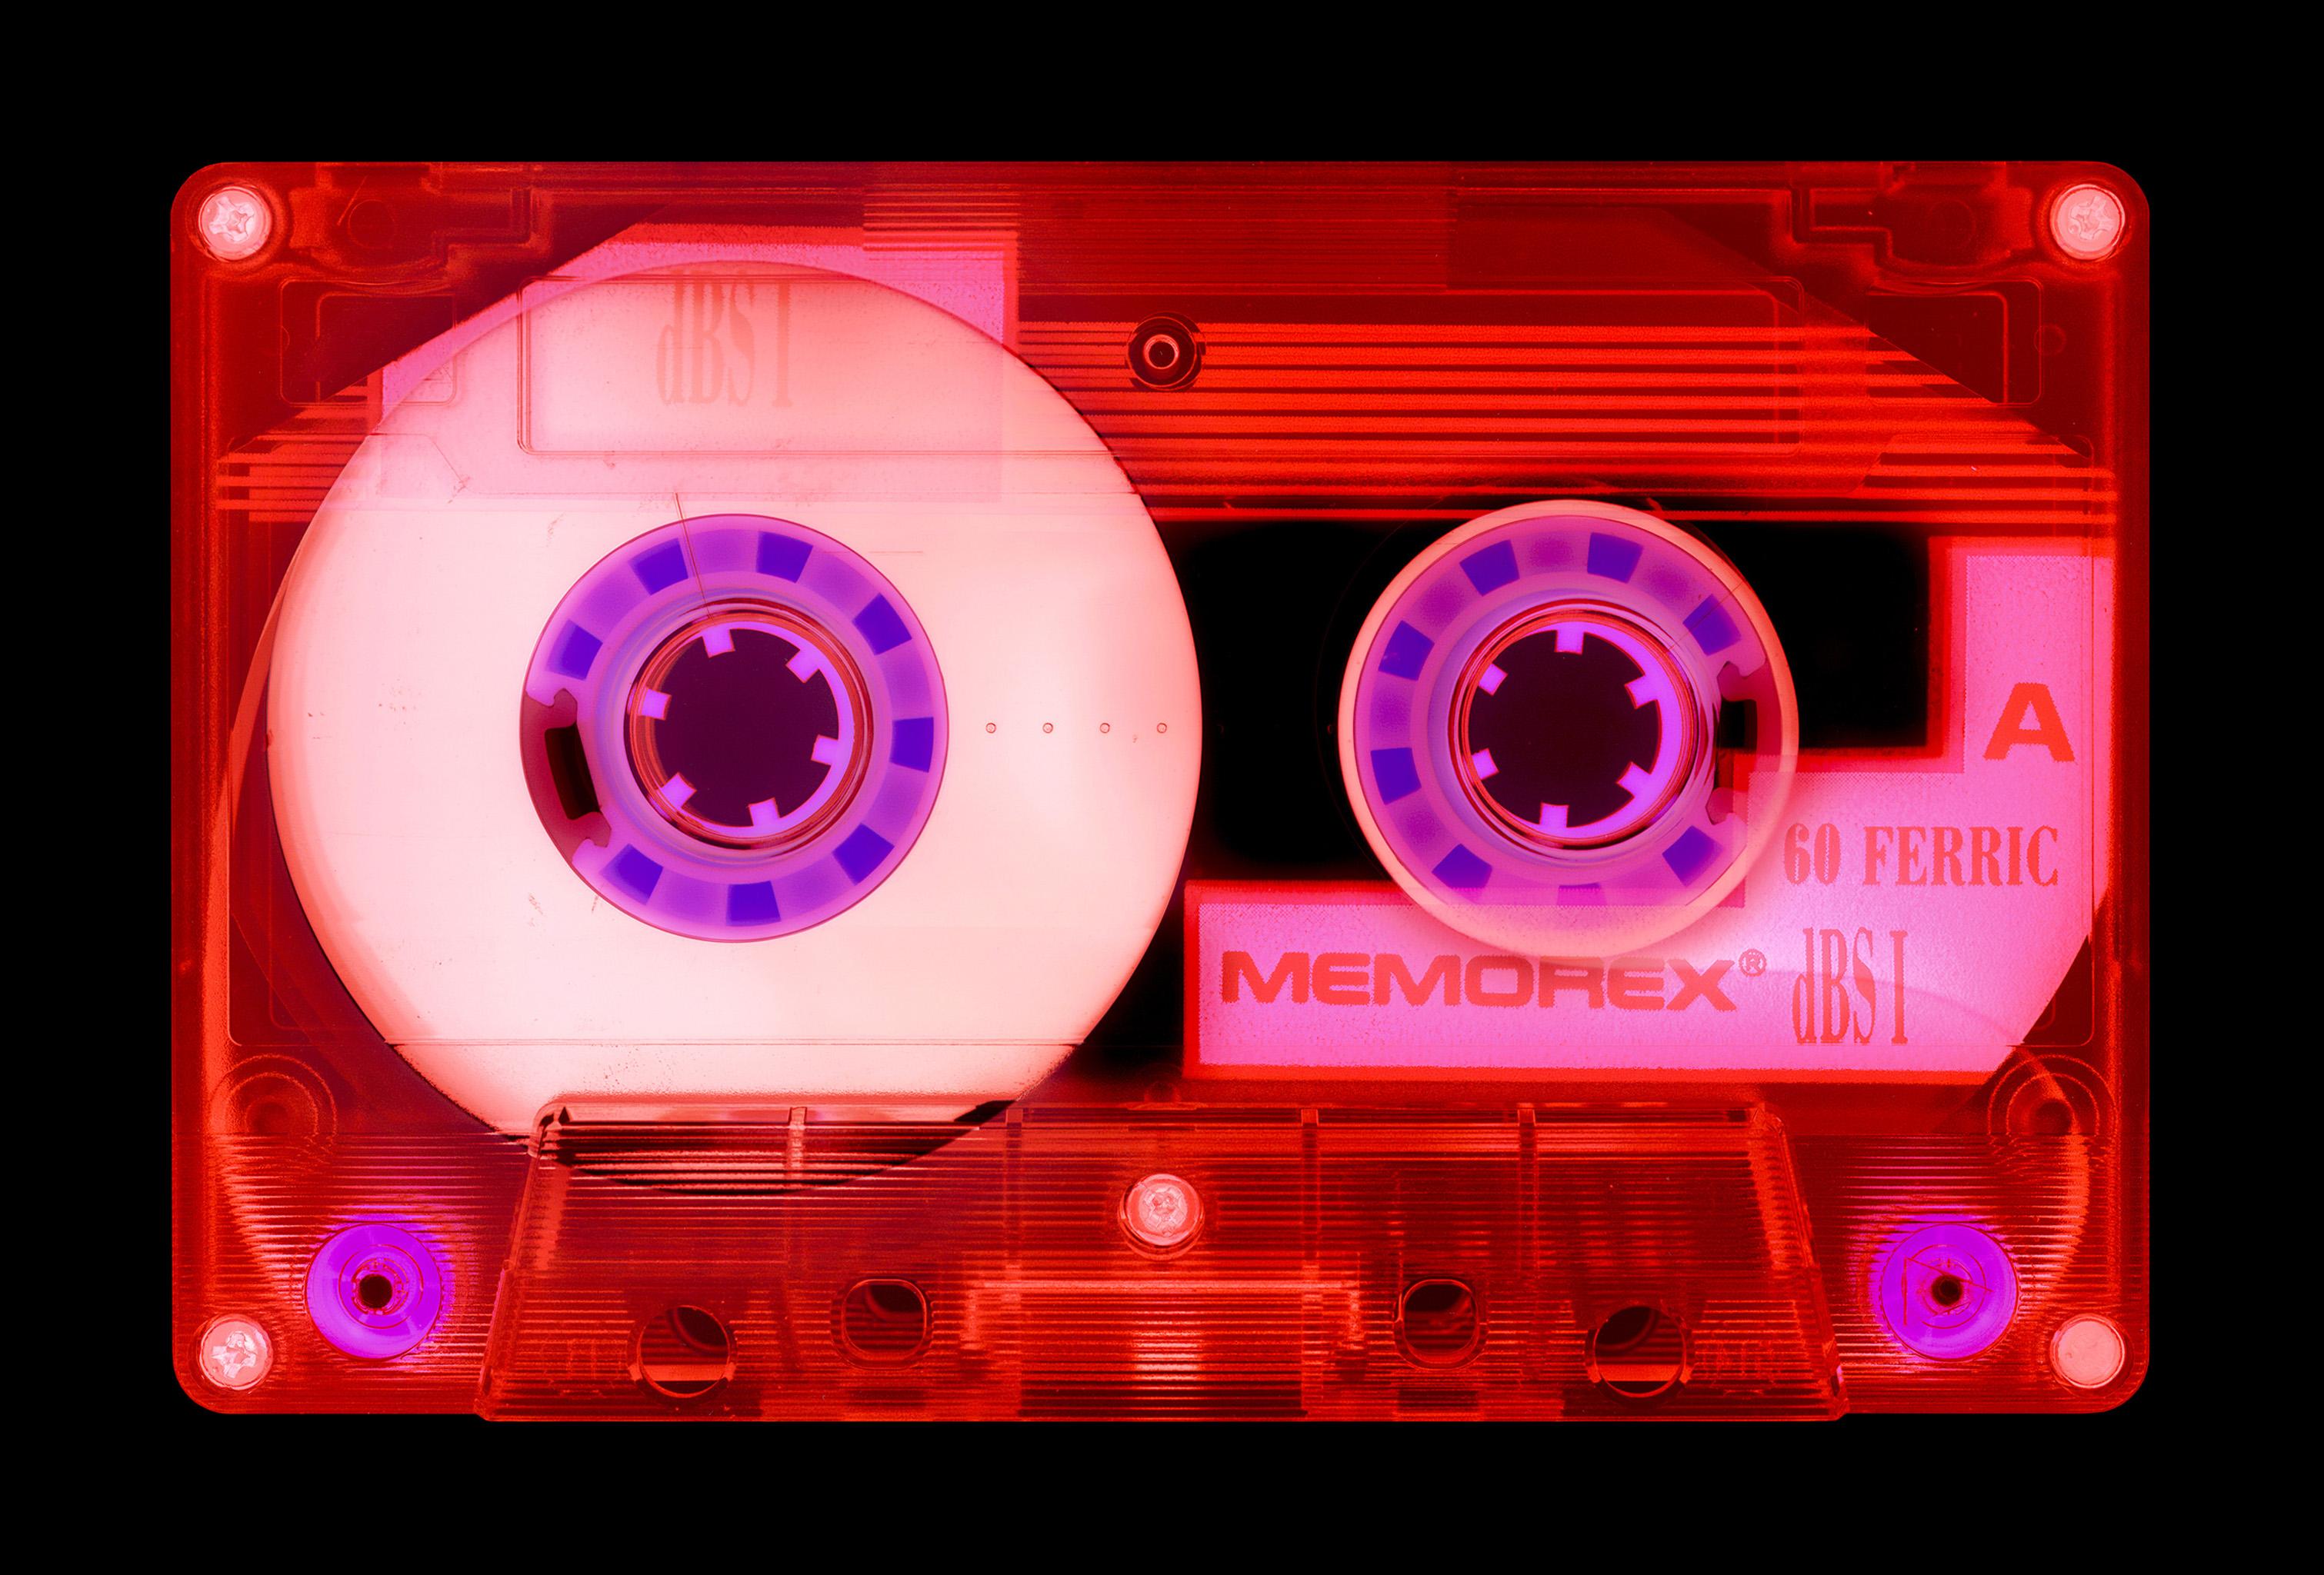 Heidler & Heeps Print - Tape Collection, Ferric 60 (Tinted Red) - Pop Art Color Photography